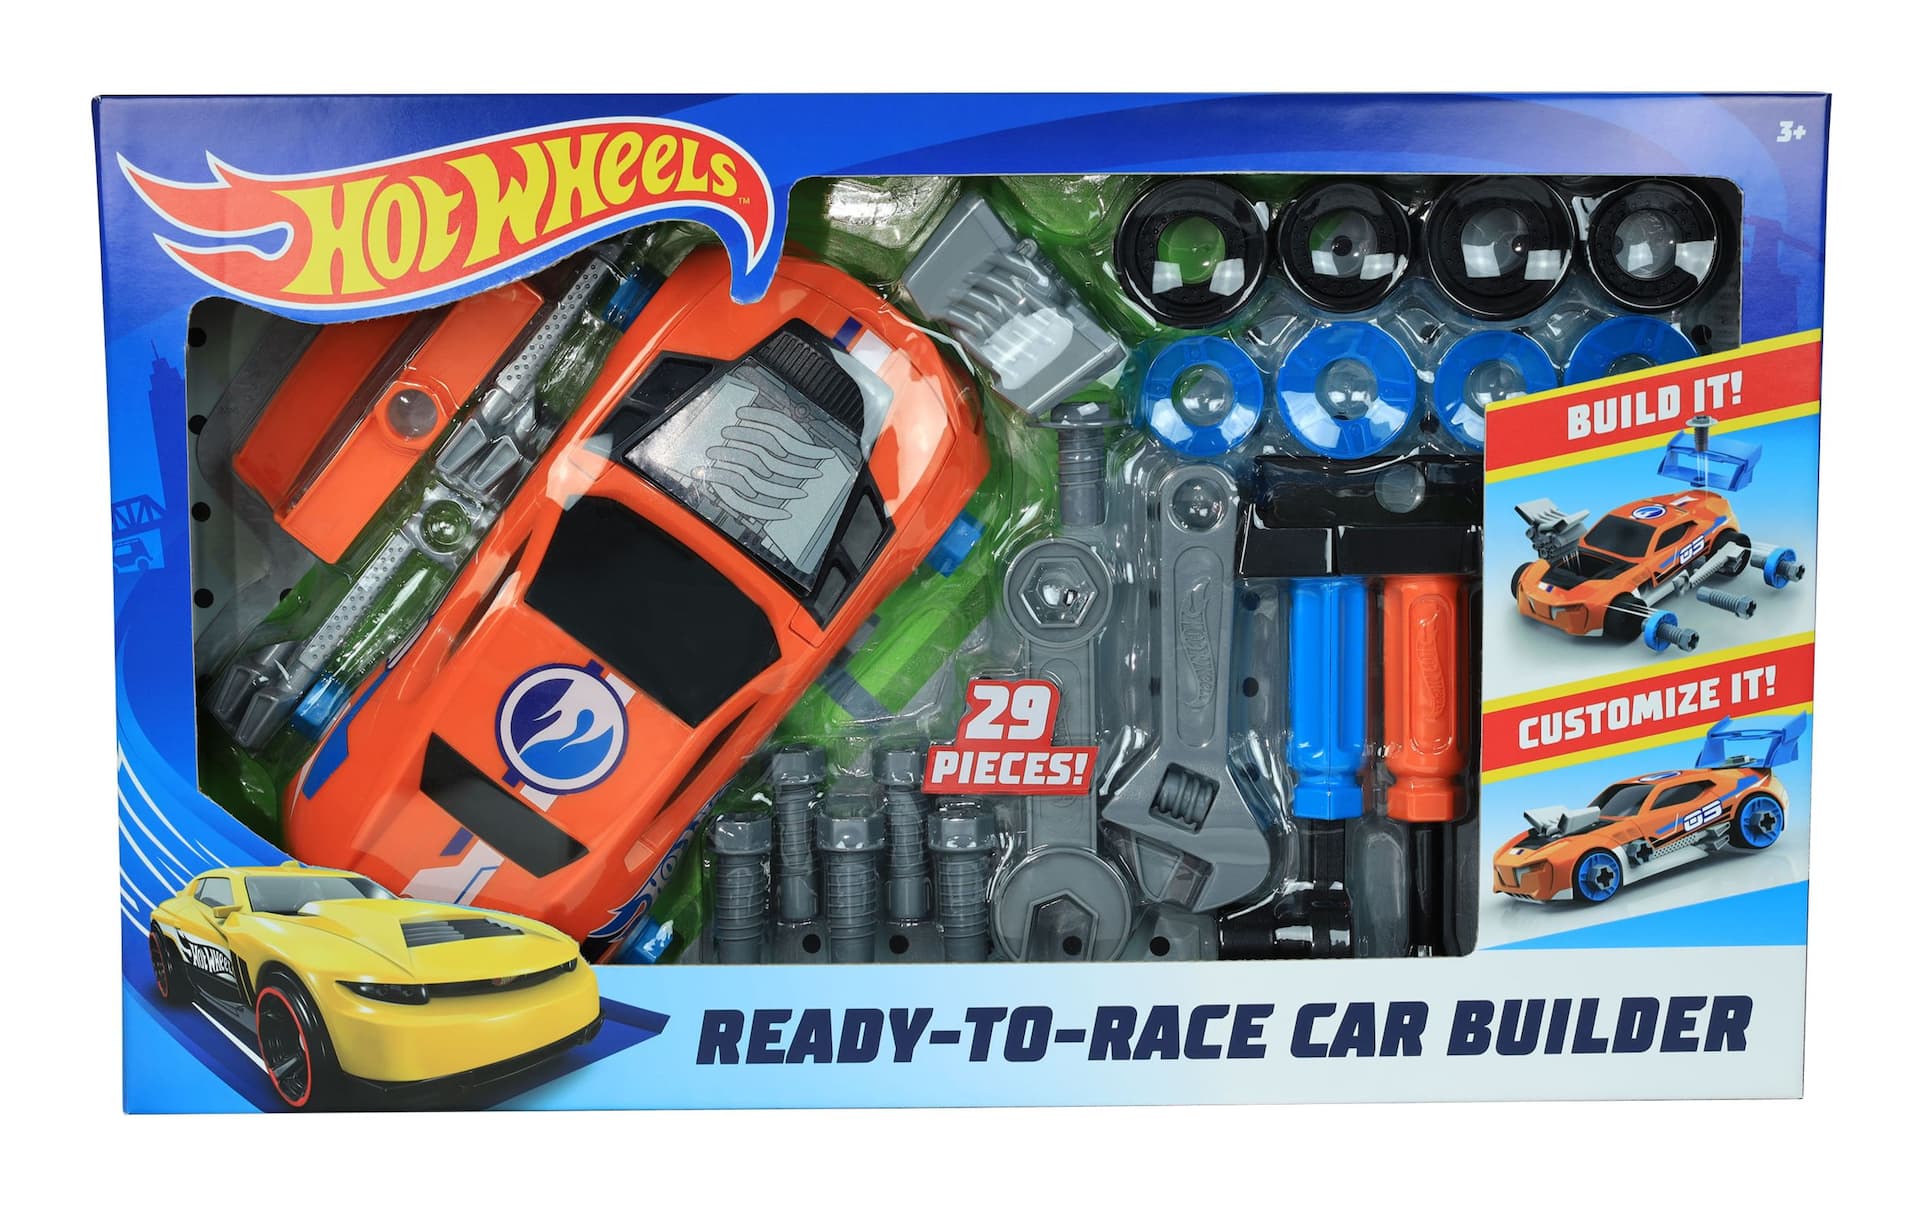 Hot Wheels Ready-To-Race Car Builder Tool Kit, 24-Piece Toy